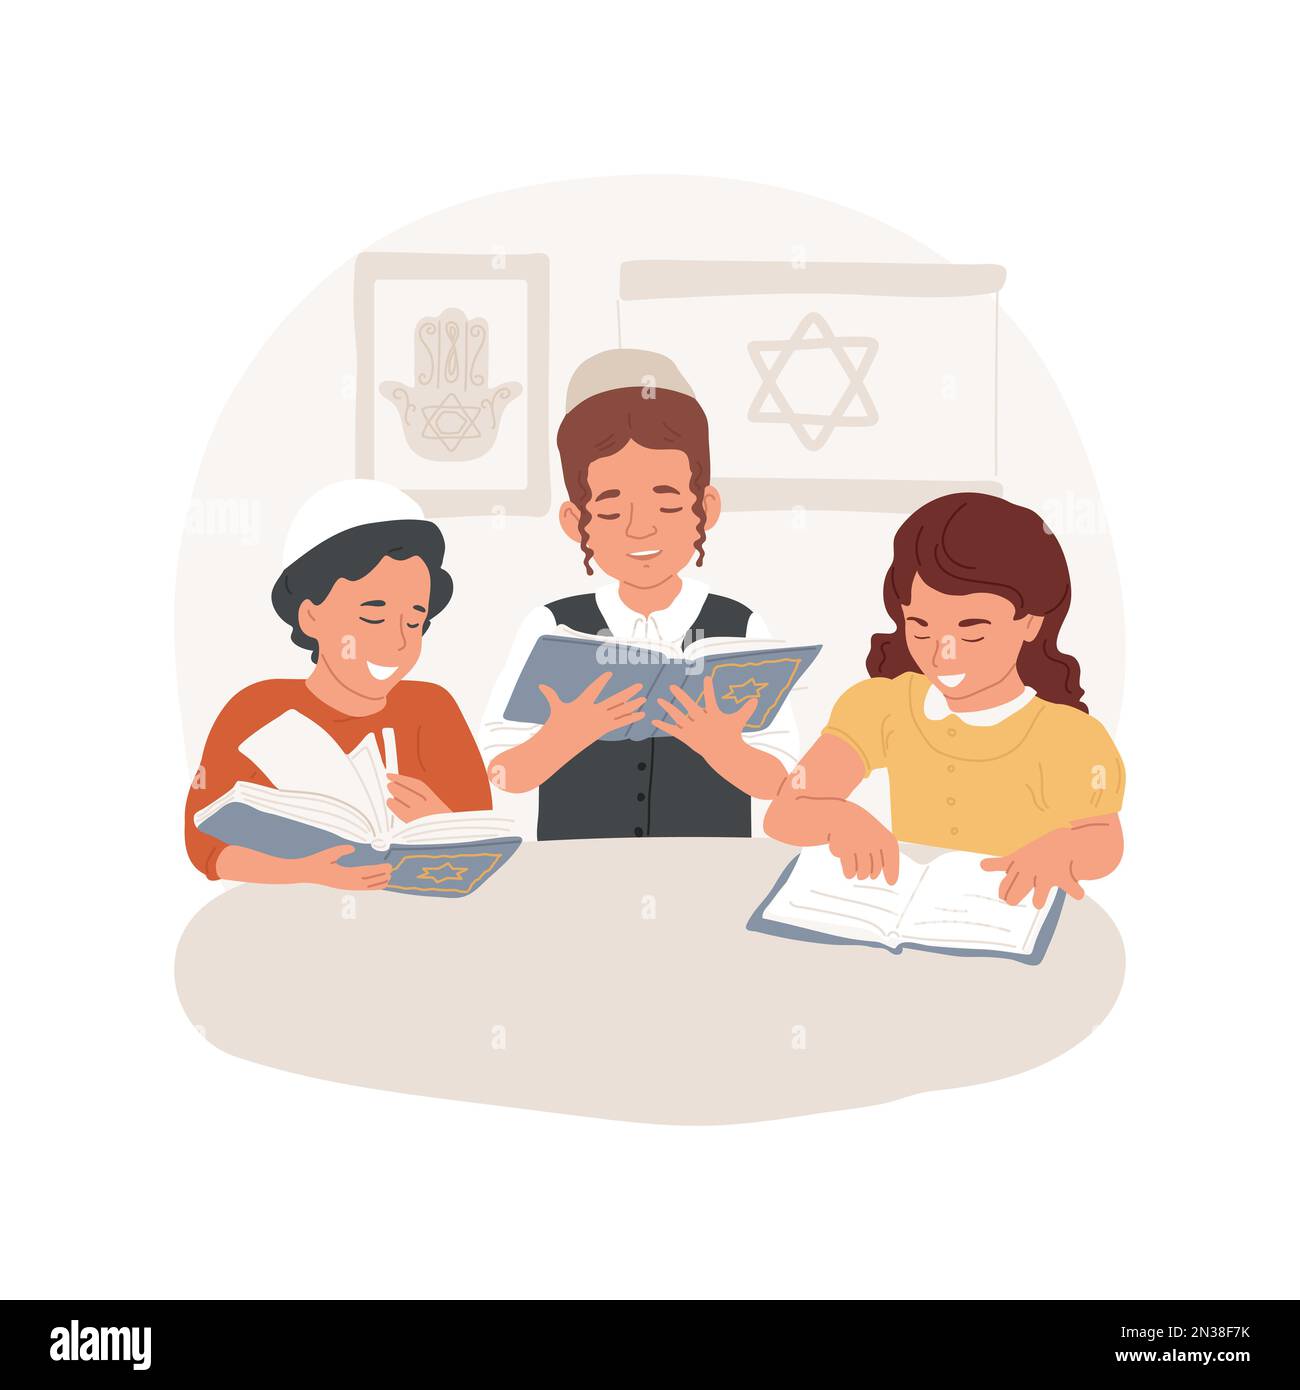 Torah study isolated cartoon vector illustration. Jewish children studying Torah together, religious Holy days, Judaism observances, old culture traditions and practices vector cartoon. Stock Vector